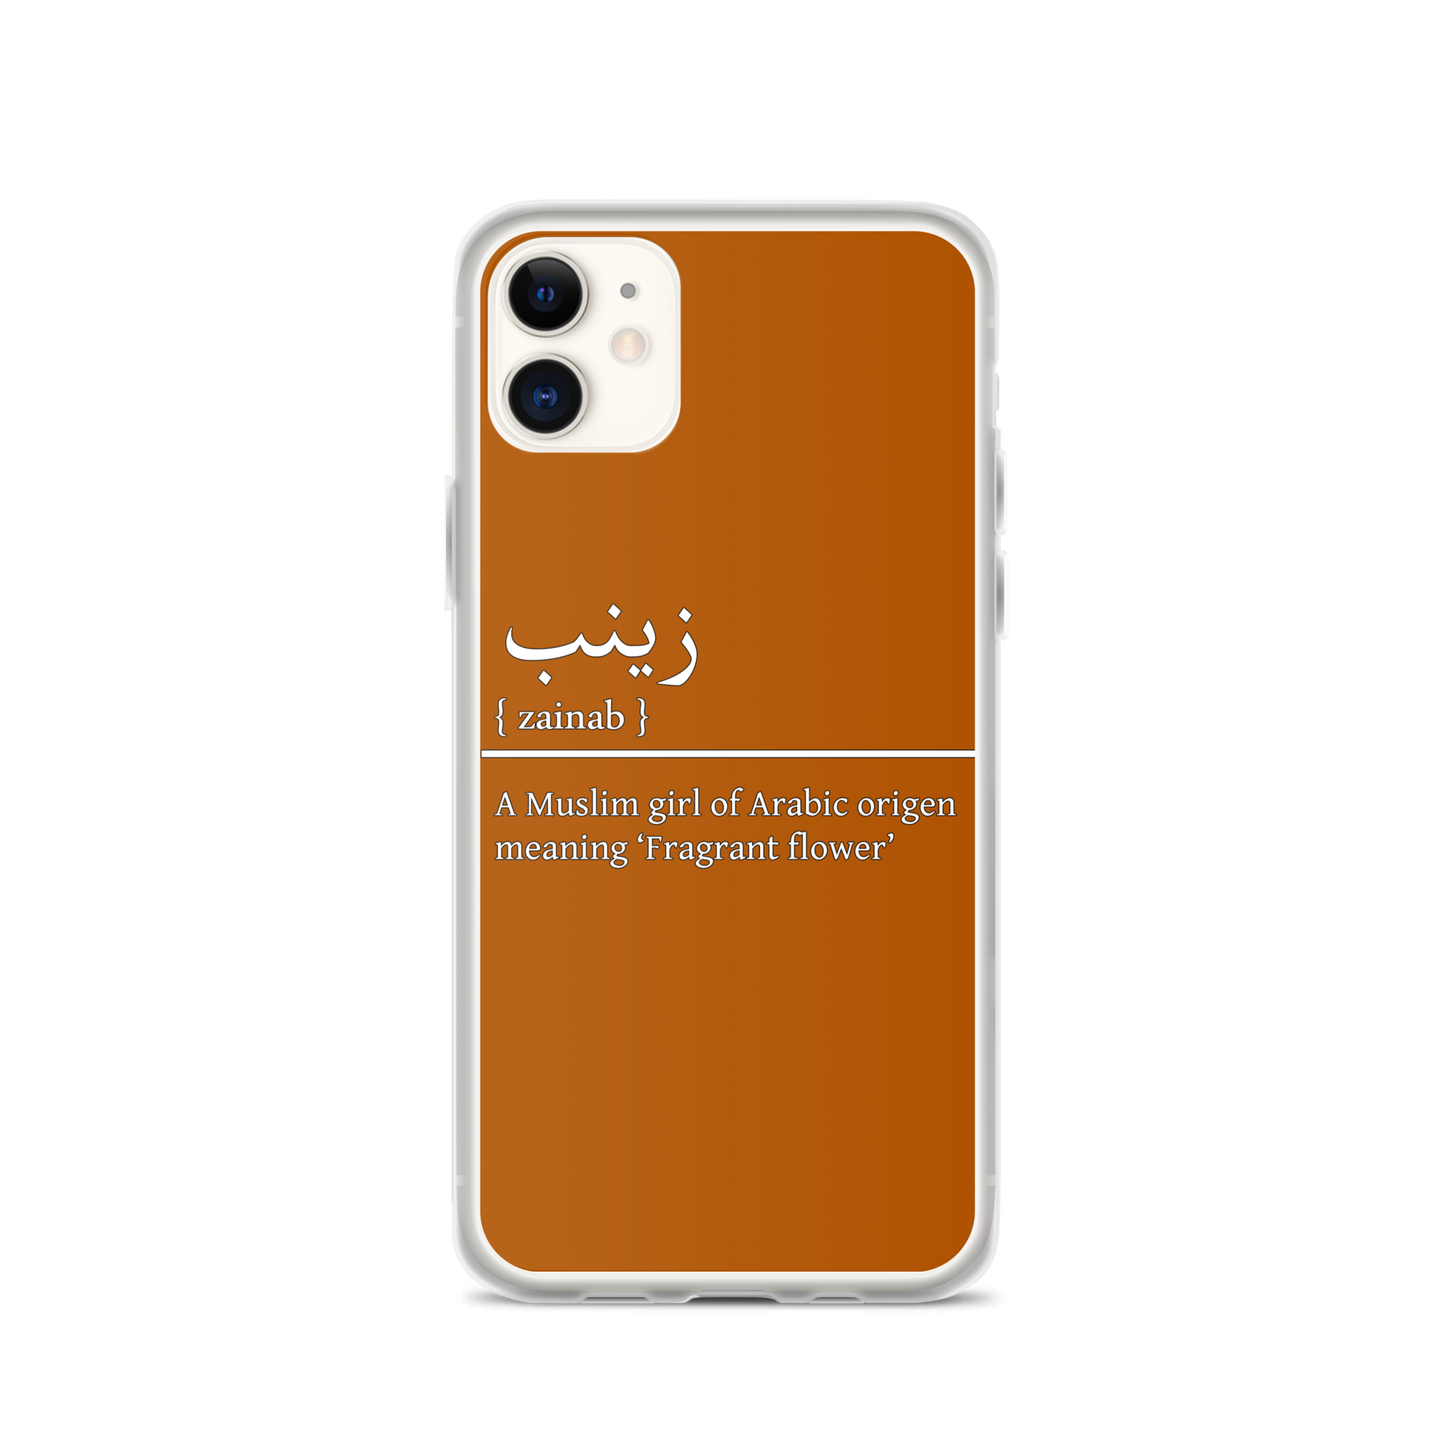 Your name in iPhone Cases